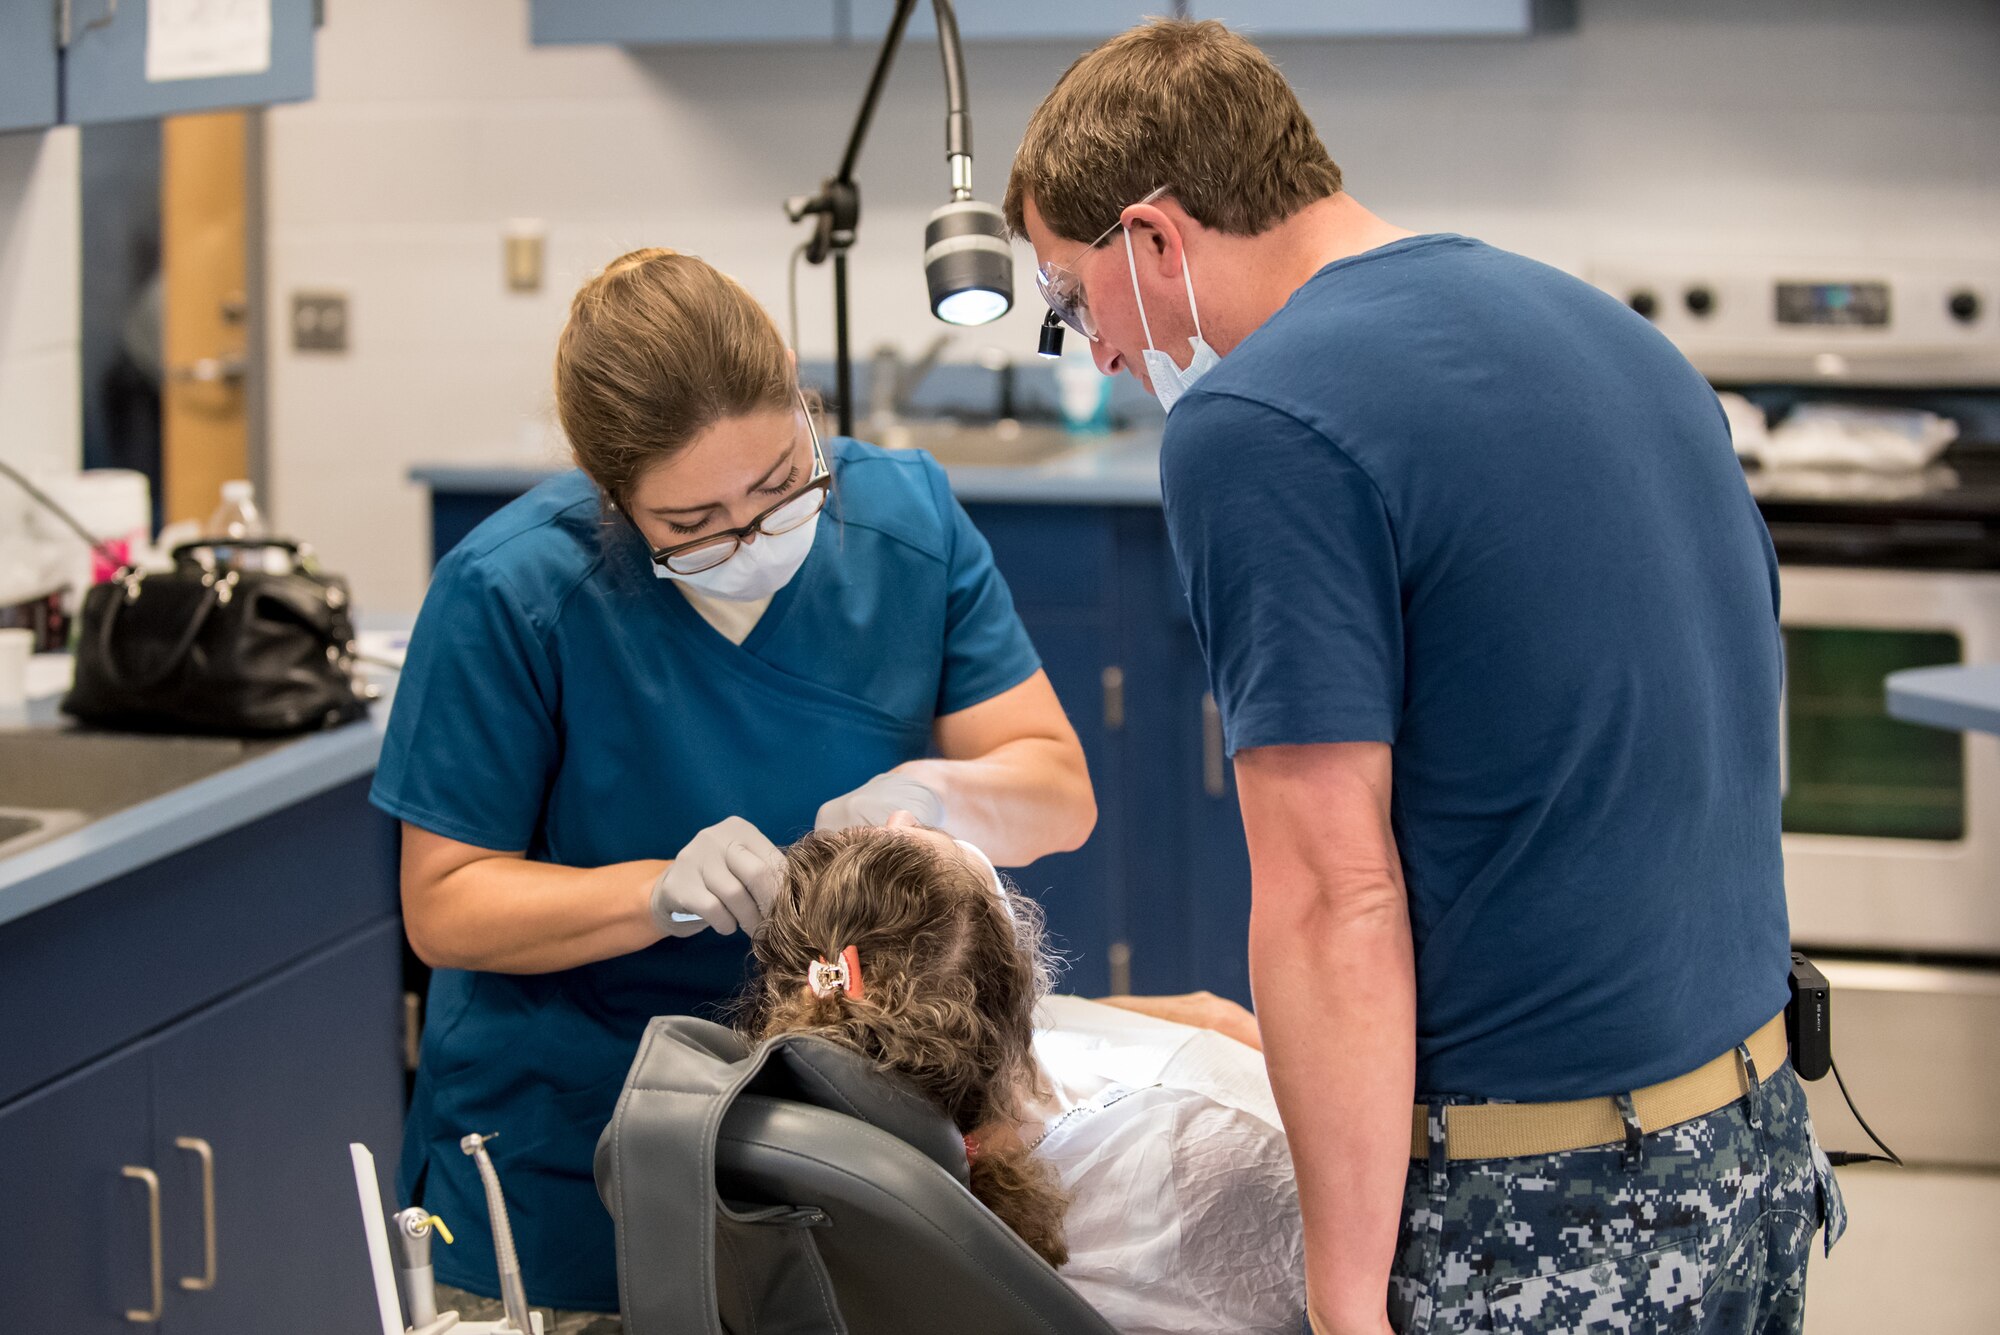 U.S. Air Force Staff Sgt. Elisabeth Runser, a dental technician from the Indiana Air National Guard’s 122nd Air Fighter Wing, and U.S. Navy Lt. Cmdr. Jeff Zimmerman from Operational Health Services Unit Pensacola in Florida, performs dental procedures on a patient at a health-care clinic being operated by the Air Guard and U.S. Navy Reserve at Estill County High School in Irvine, Ky., June 21, 2018. The clinic is one of four that comprised Operation Bobcat, a 10-day mission to provide military medical troops with crucial training in field operations and logistics while offering no-cost health care to the residents of Eastern Kentucky. The clinics, which operated from June 15-24, offered non-emergent medical care; sports physicals; dental cleanings, fillings and extractions; eye exams and no-cost prescription eye glasses. (U.S. Air National Guard photo by Lt. Col. Dale Greer)